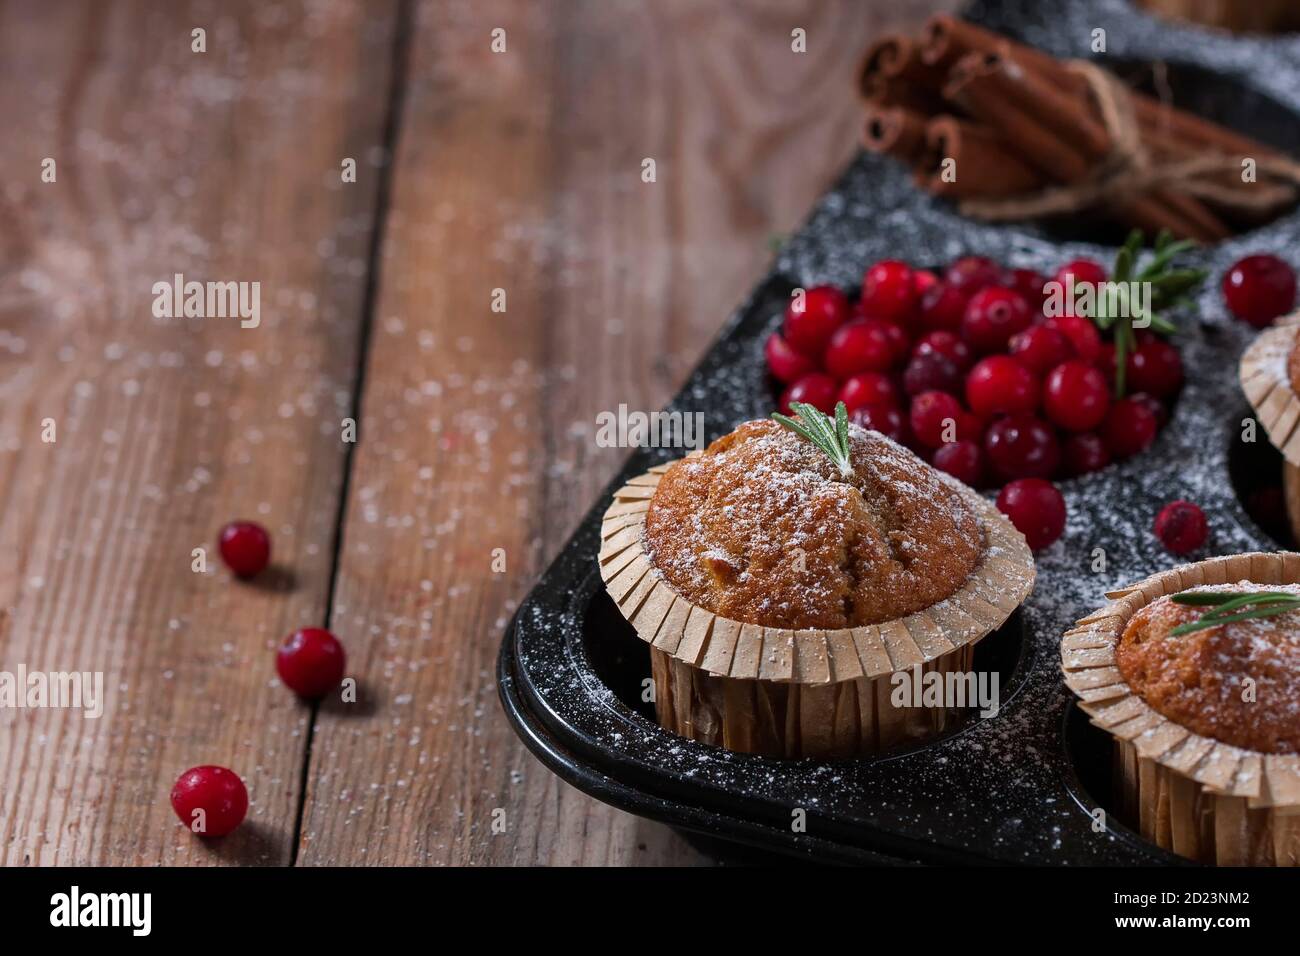 Fresh homemade Cranberry muffins in baking form on wooden table with Christmas decoration. Muffins in eco-friendly recyclable paper packaging. Stock Photo